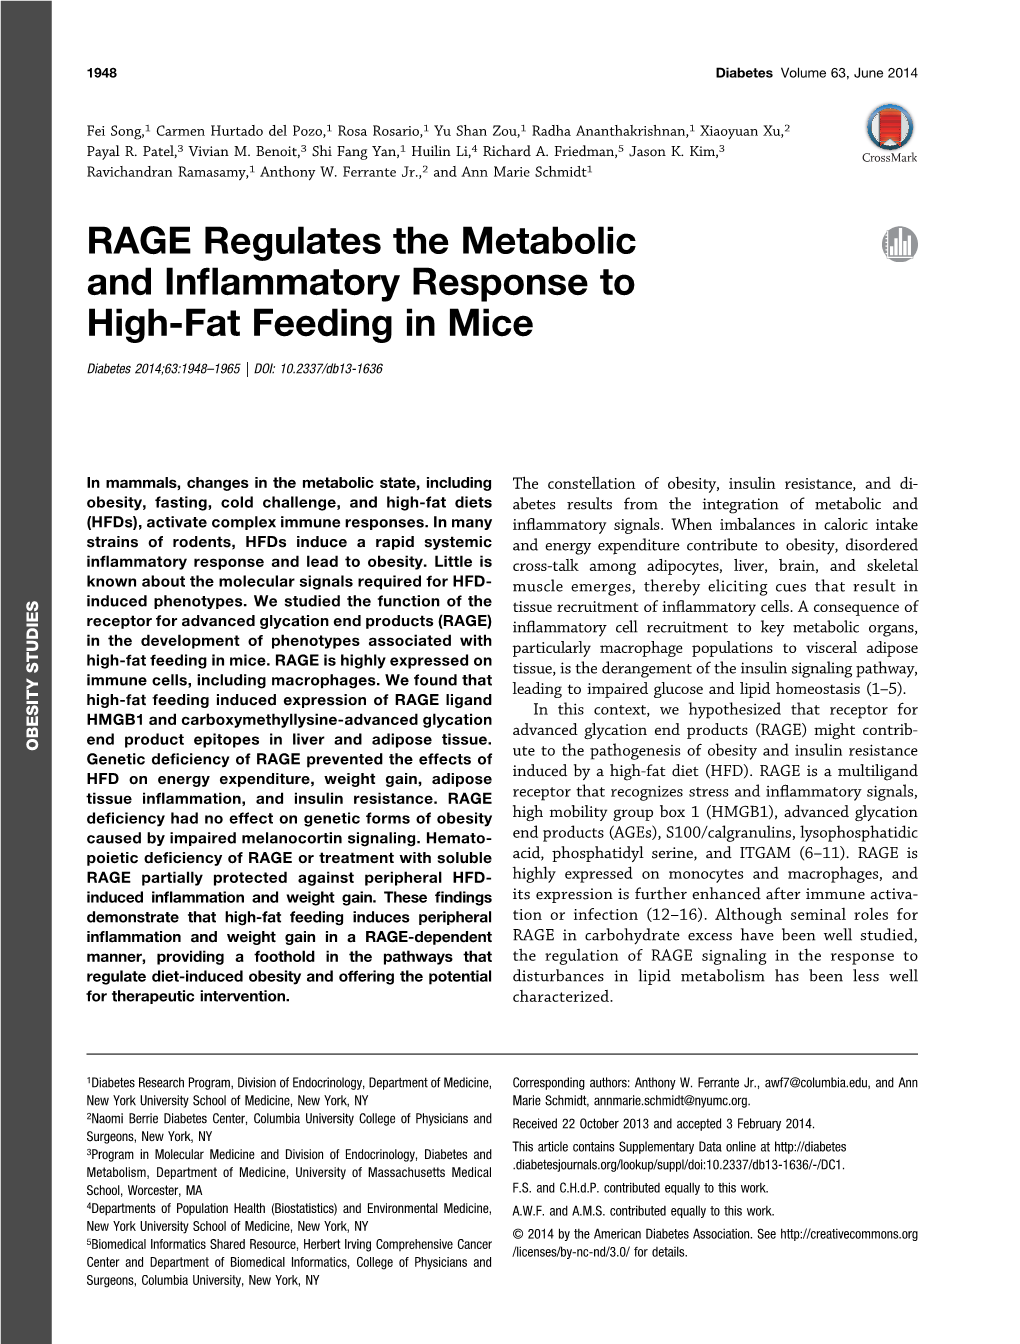 RAGE Regulates the Metabolic and Inflammatory Response to High-Fat